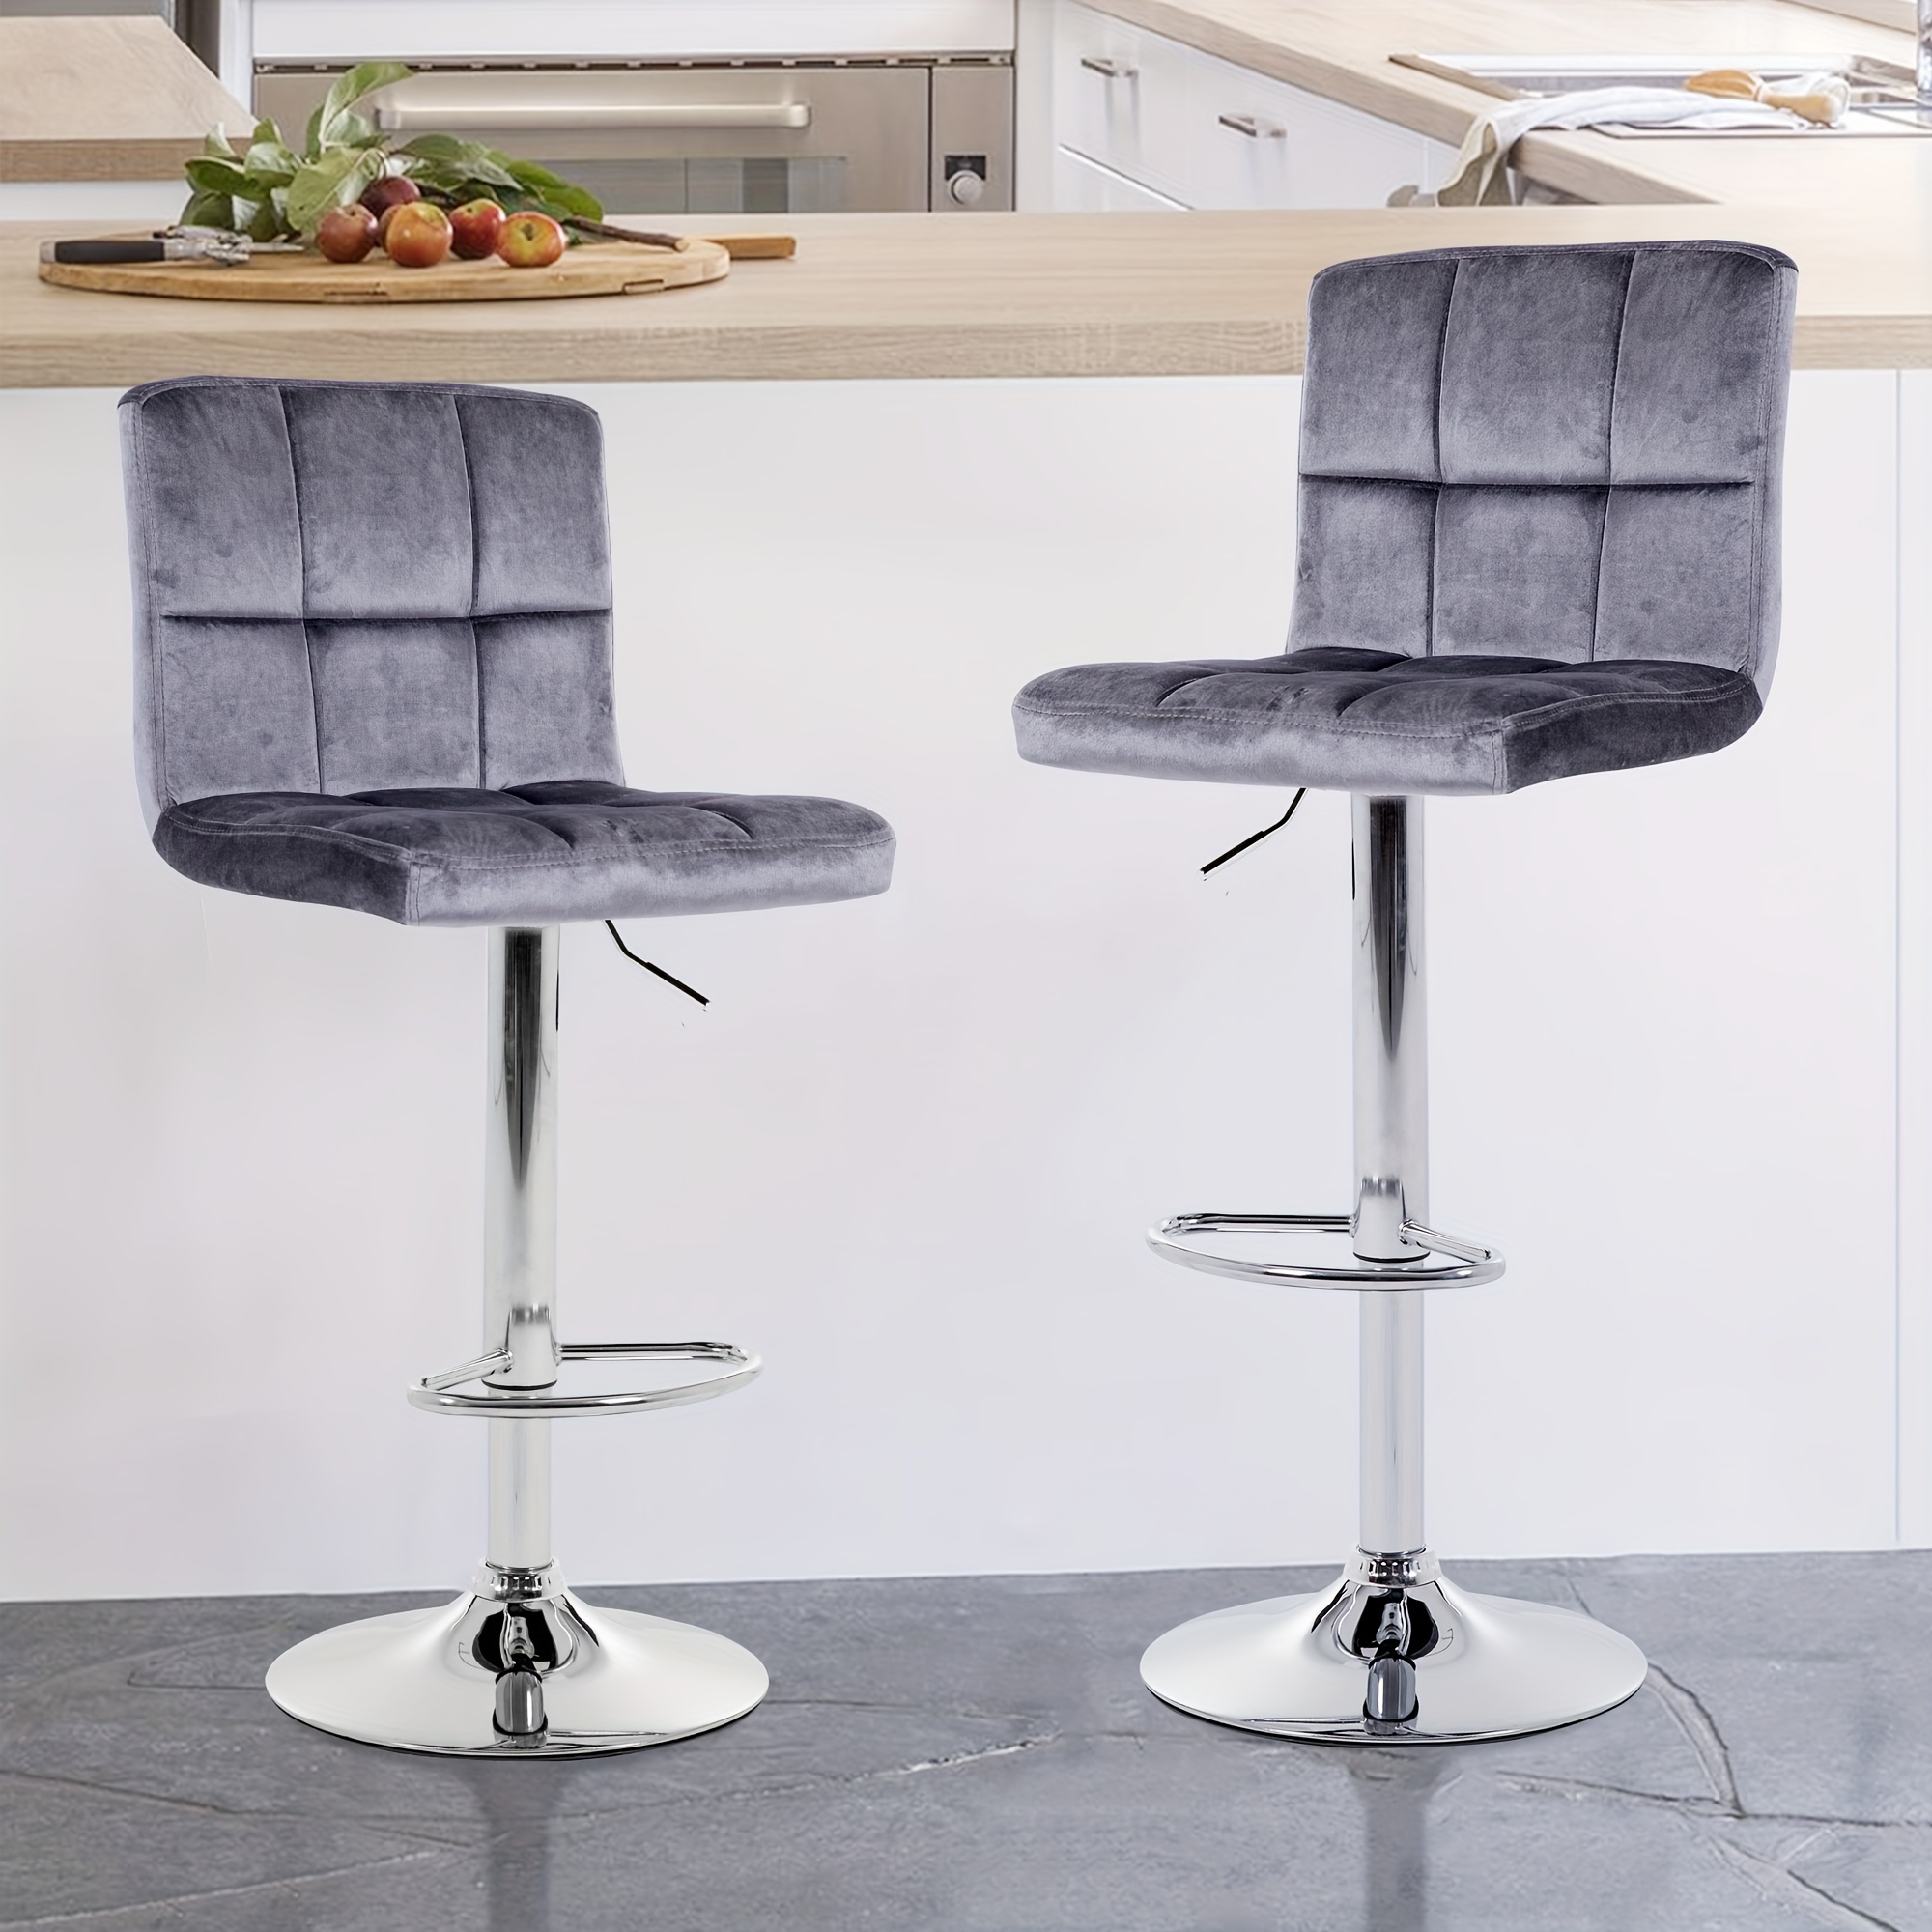 

Square Back Adjustable Counter Height Bar Stool, Swivel Bar Stools With Metal Chassis, Gray (set Of 2)